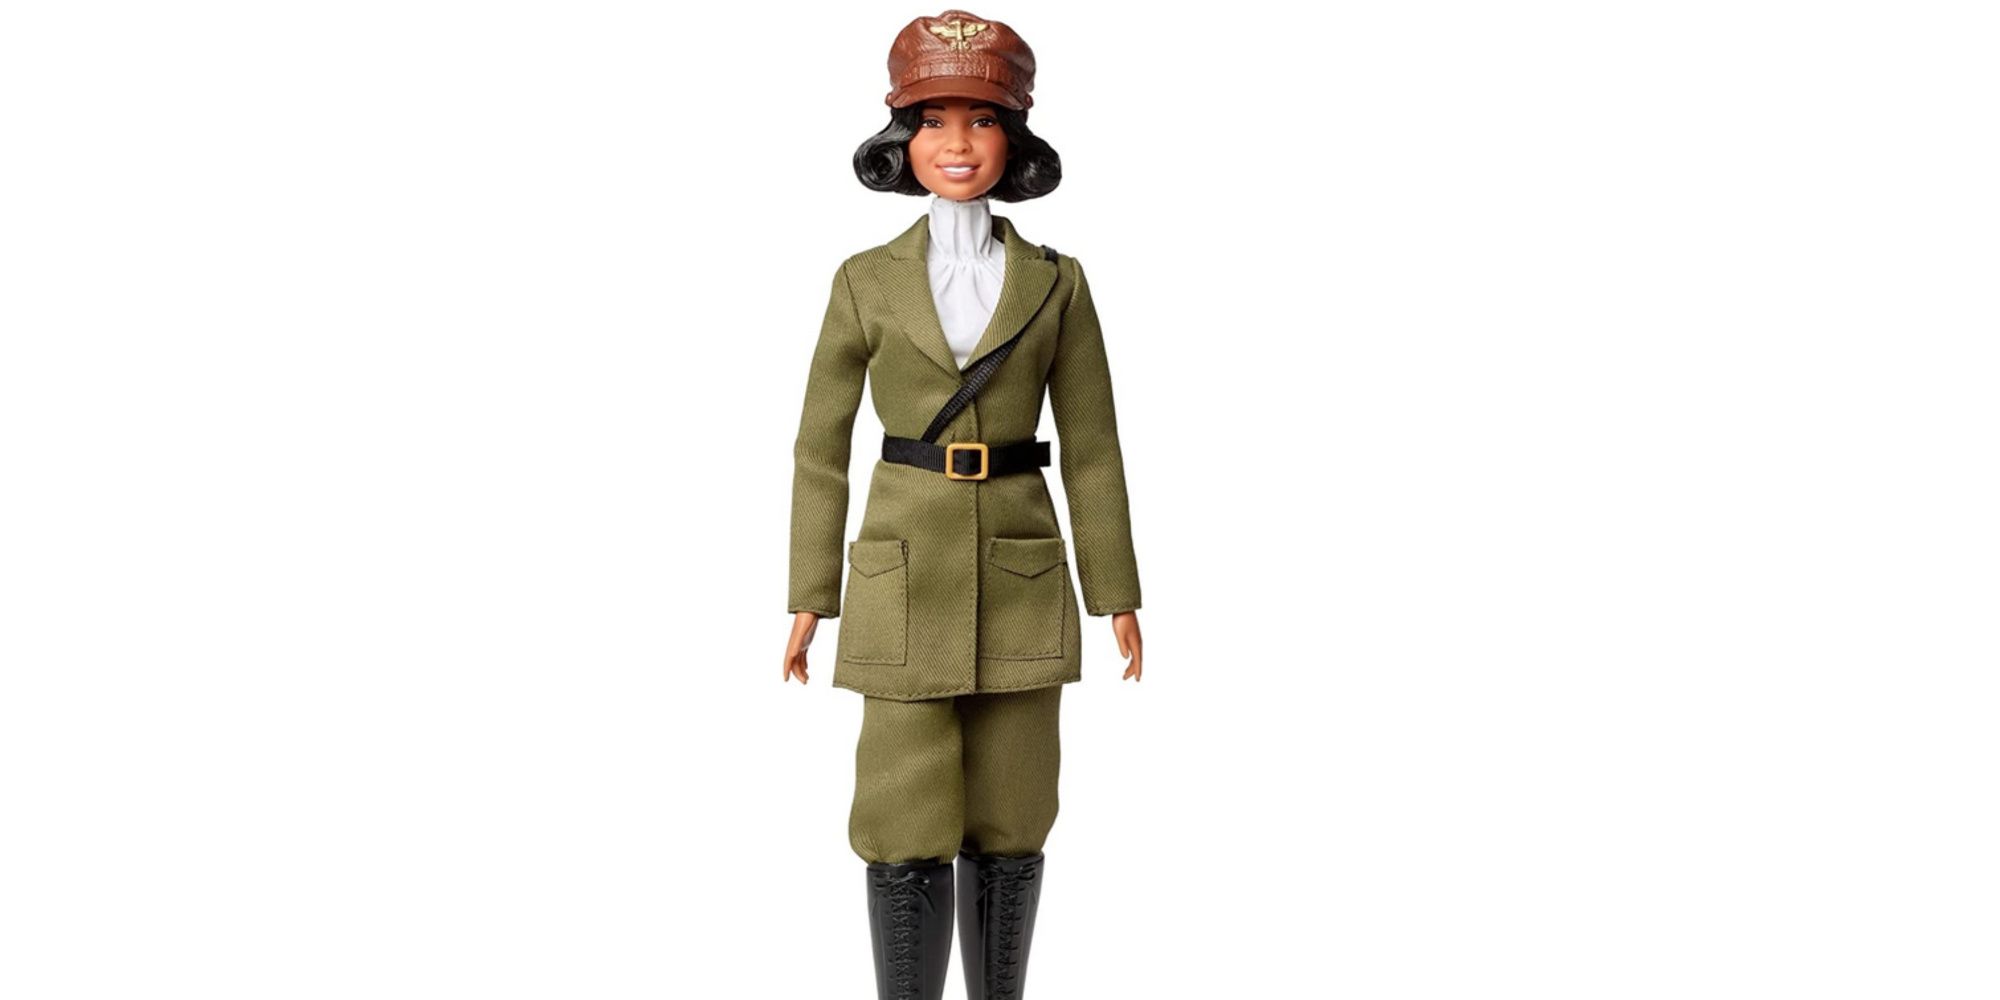 Bessie Coleman doll from the Barbie Inspiration Woman series